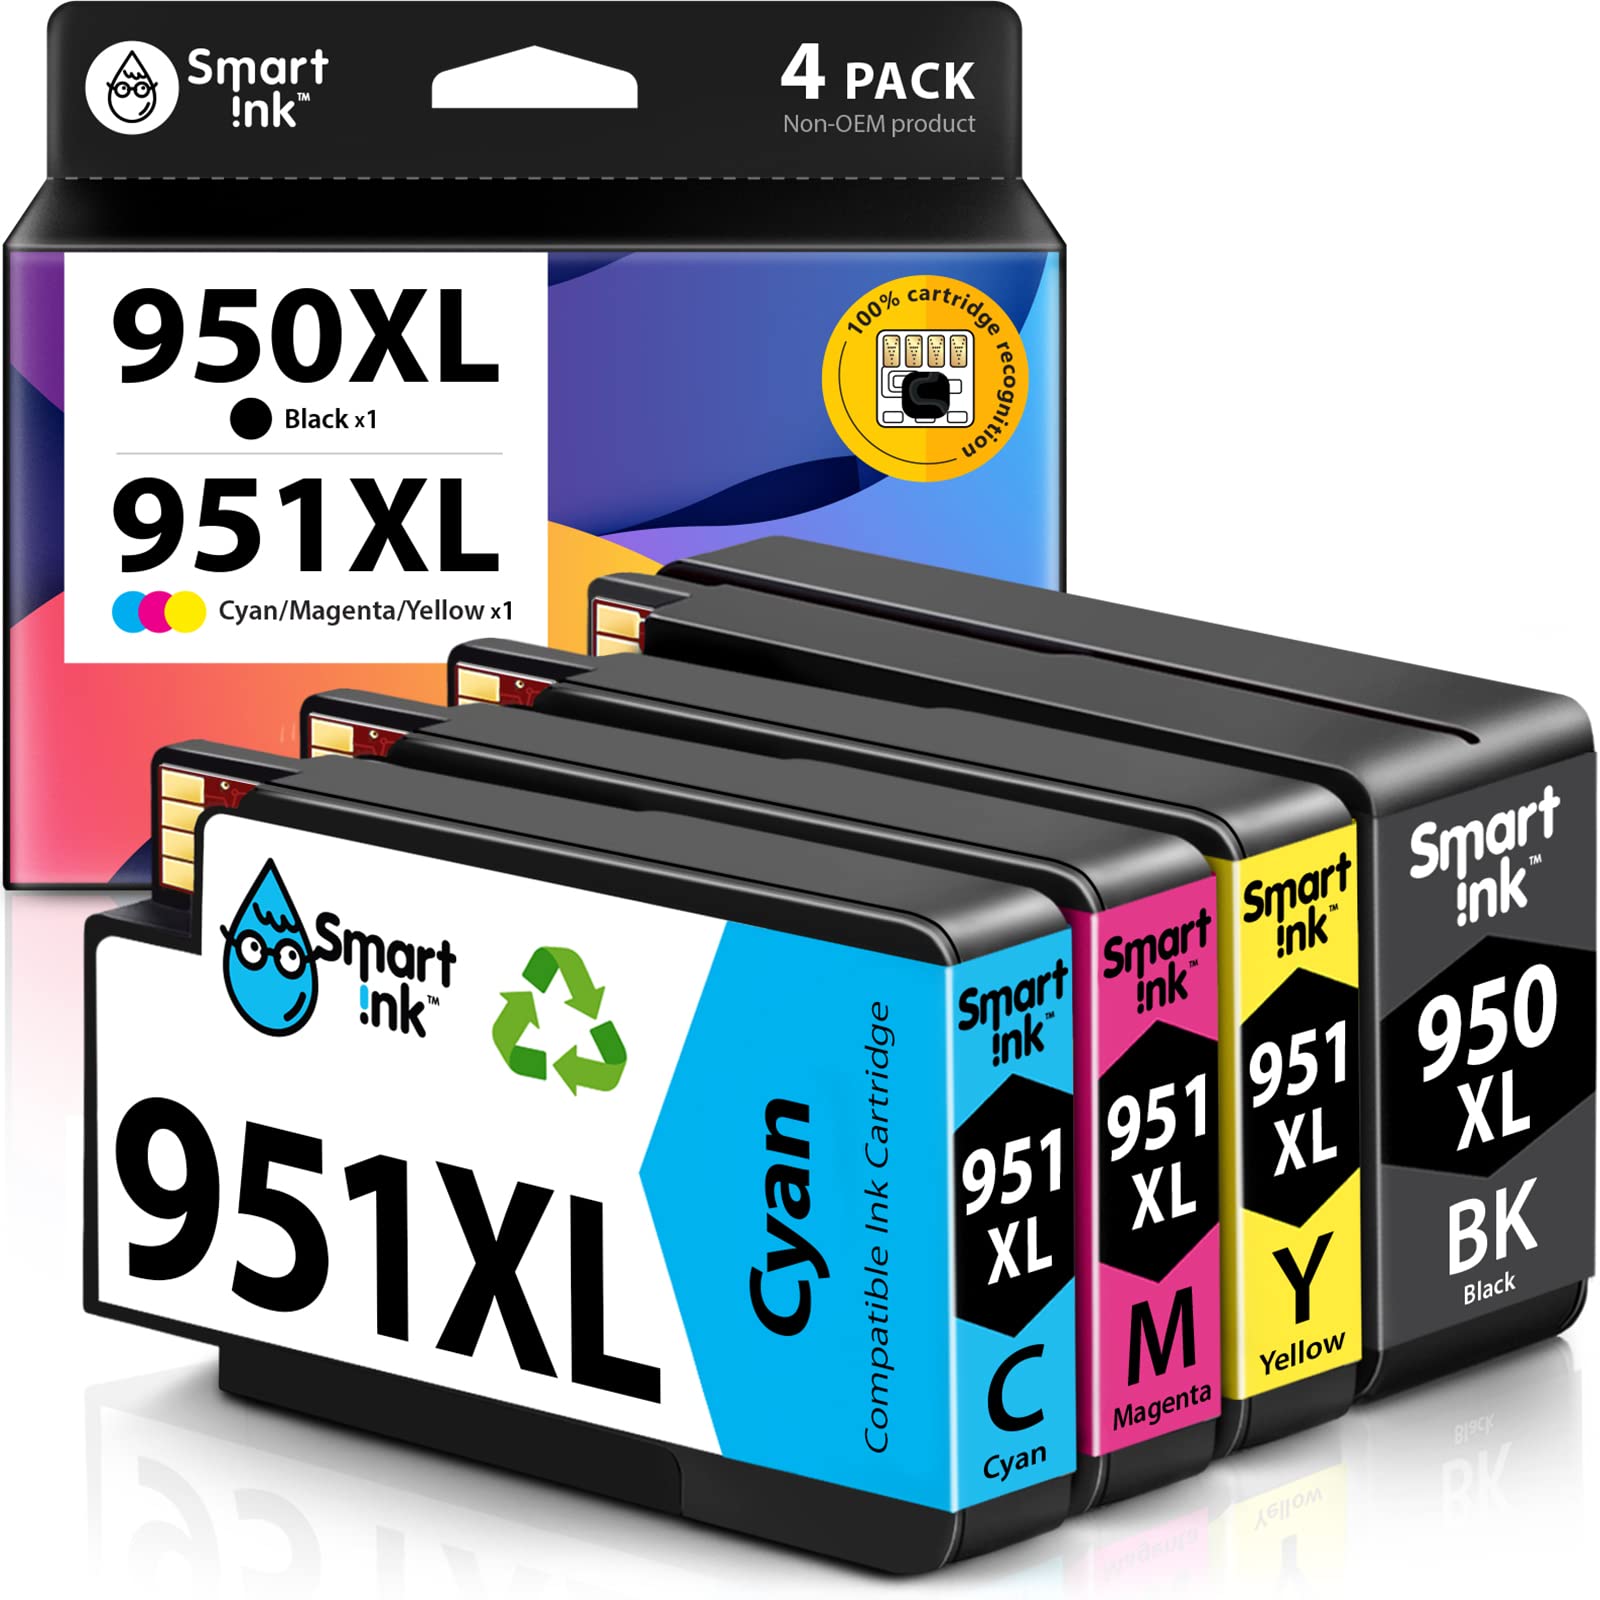 Genuine HP Cartridges: Discover the importance of using genuine HP ink cartridges to ensure optimal performance and print quality.
Compatibility: Understand which ink cartridges are compatible with your HP OfficeJet Pro 8610 printer model.